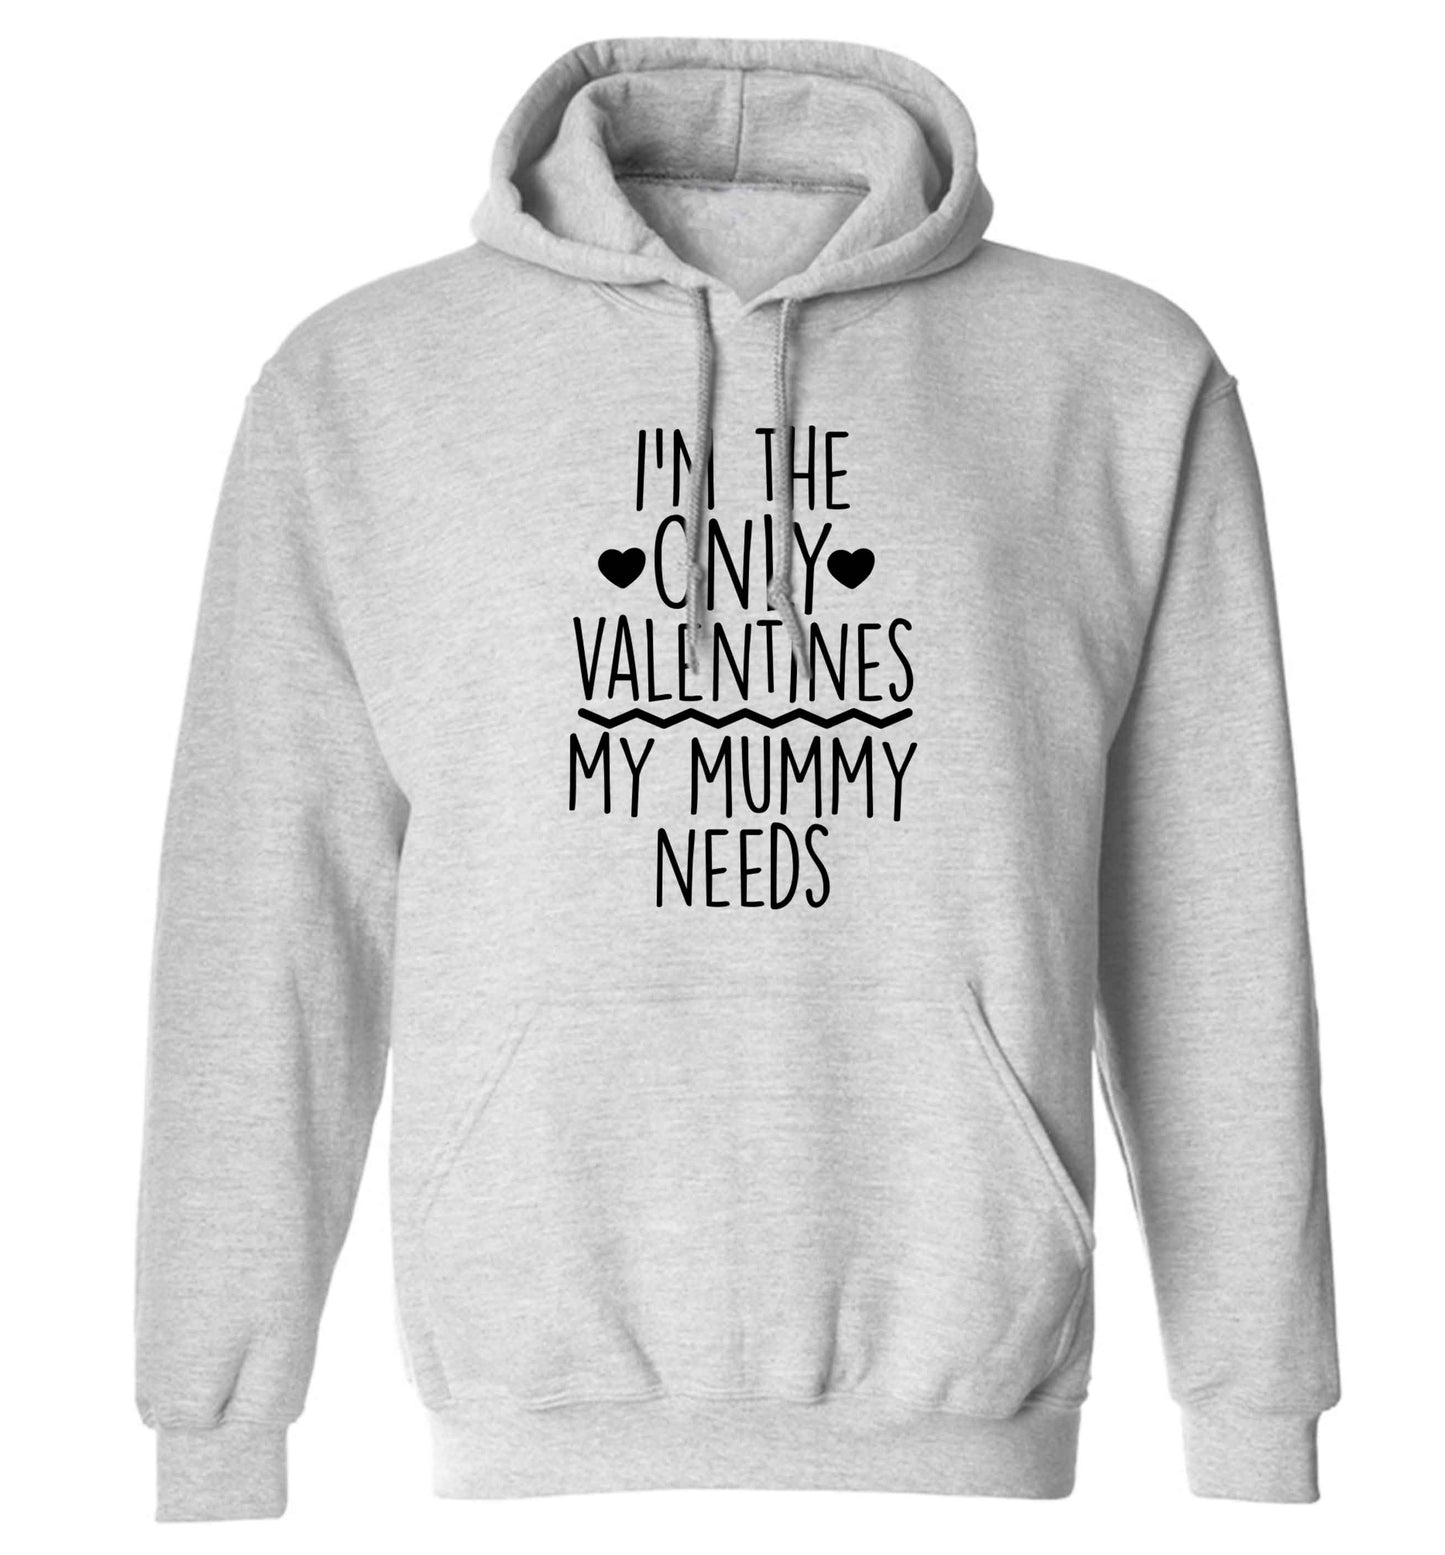 I'm the only valentines my mummy needs adults unisex grey hoodie 2XL